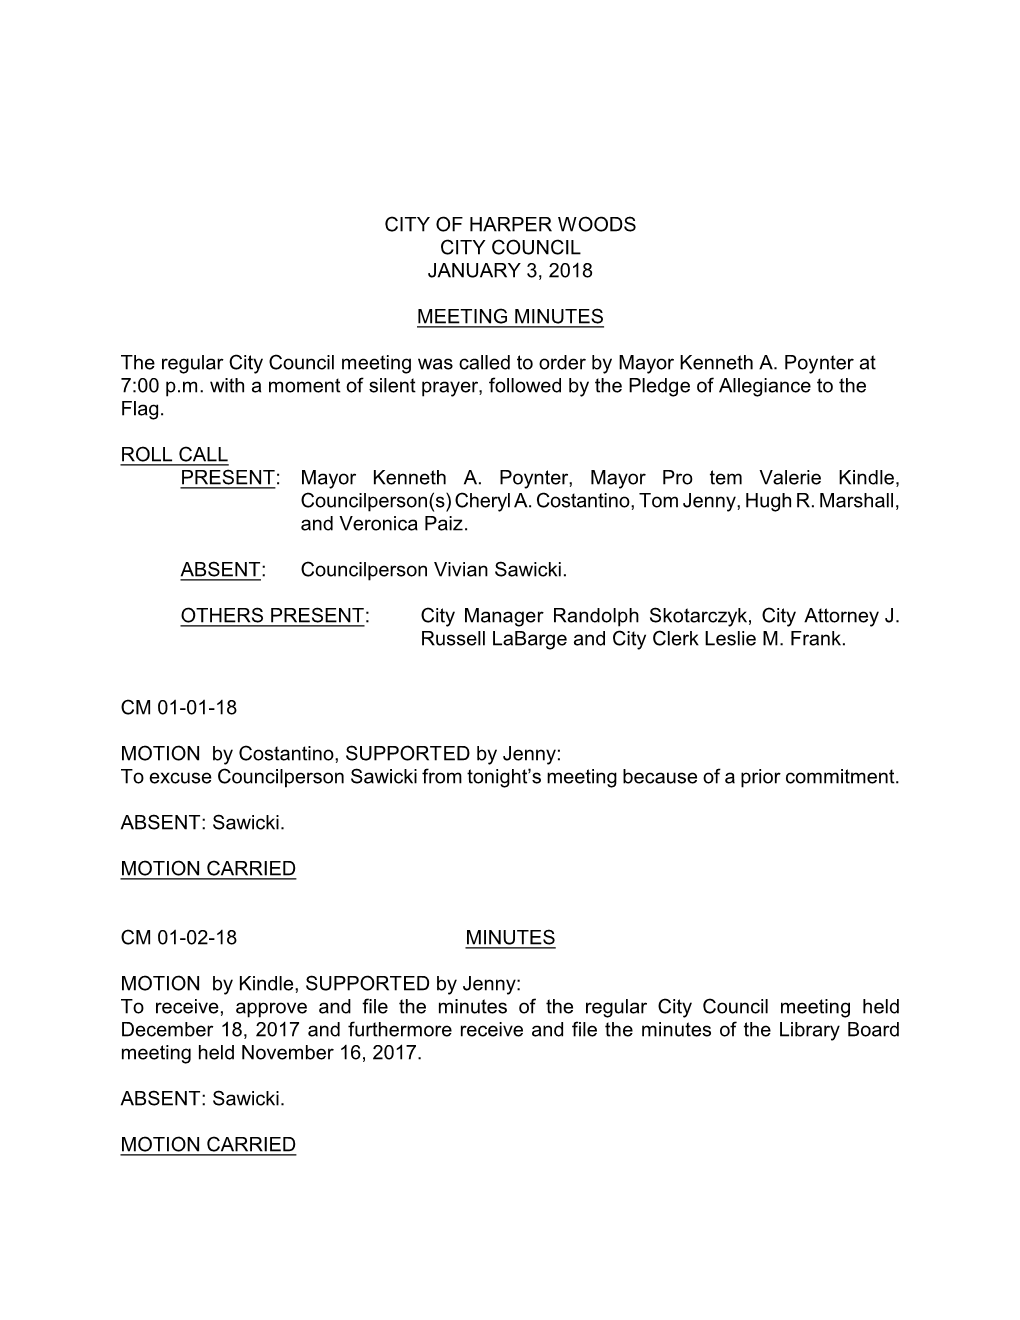 CITY of HARPER WOODS CITY COUNCIL JANUARY 3, 2018 MEETING MINUTES the Regular City Council Meeting Was Called to Order by Mayor